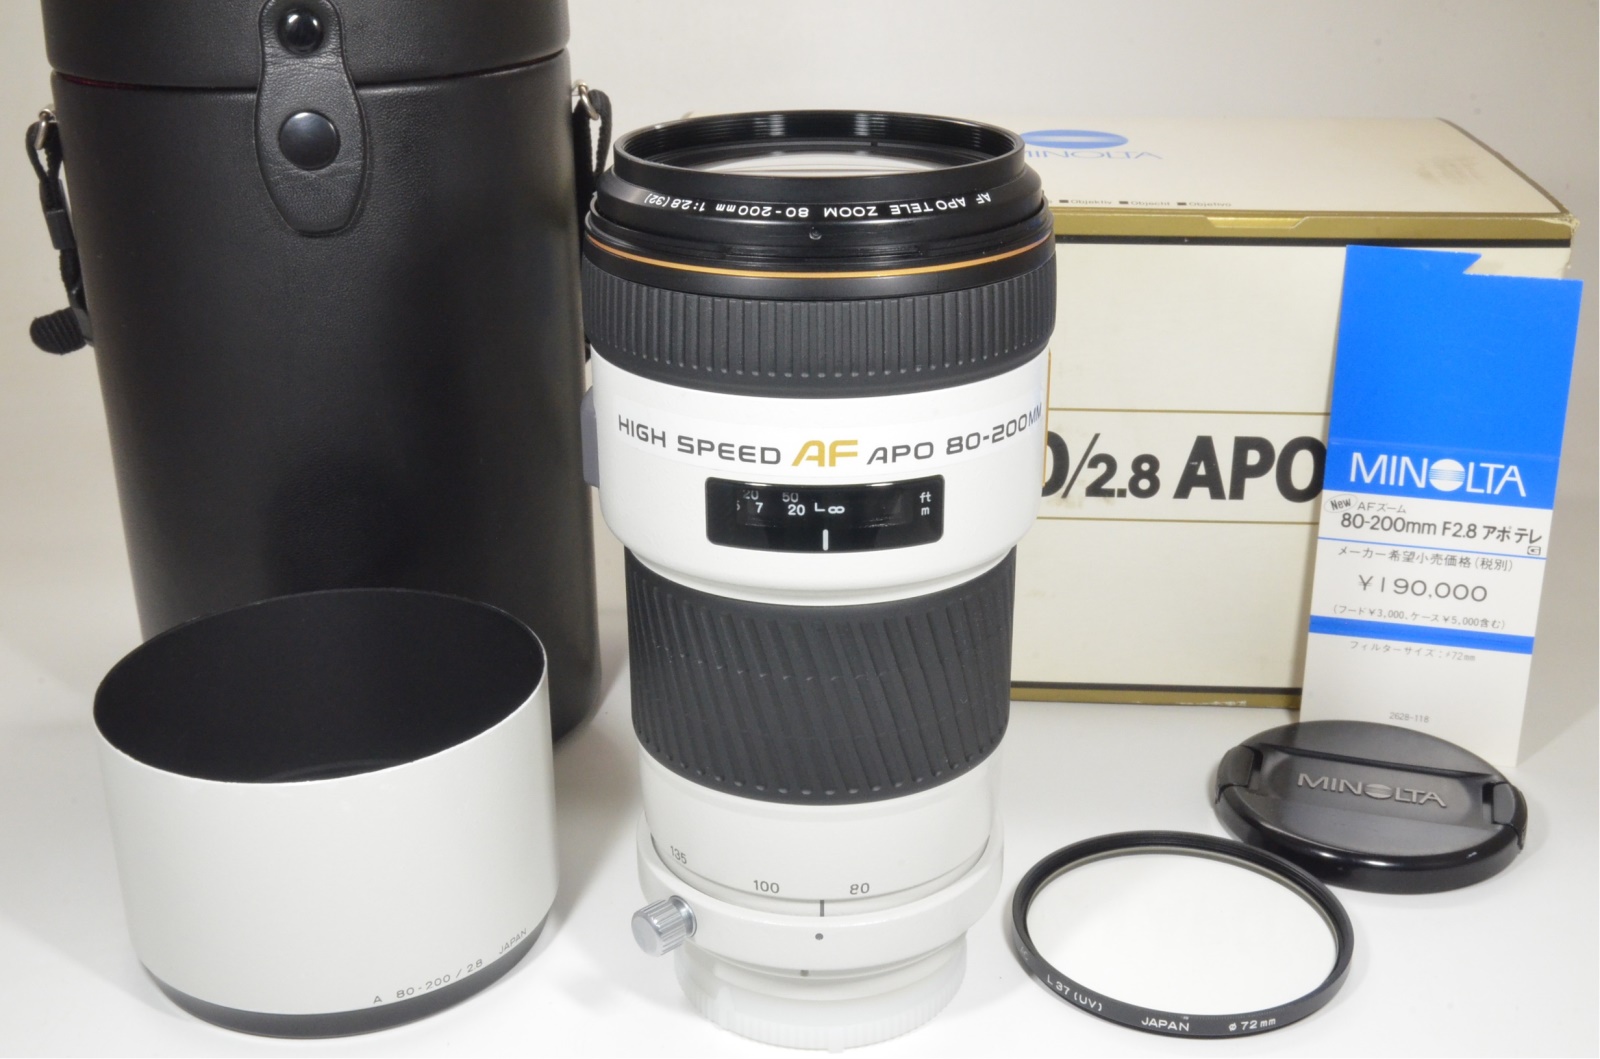 minolta high speed af apo 80-200mm f2.8 g lens sony with case and box